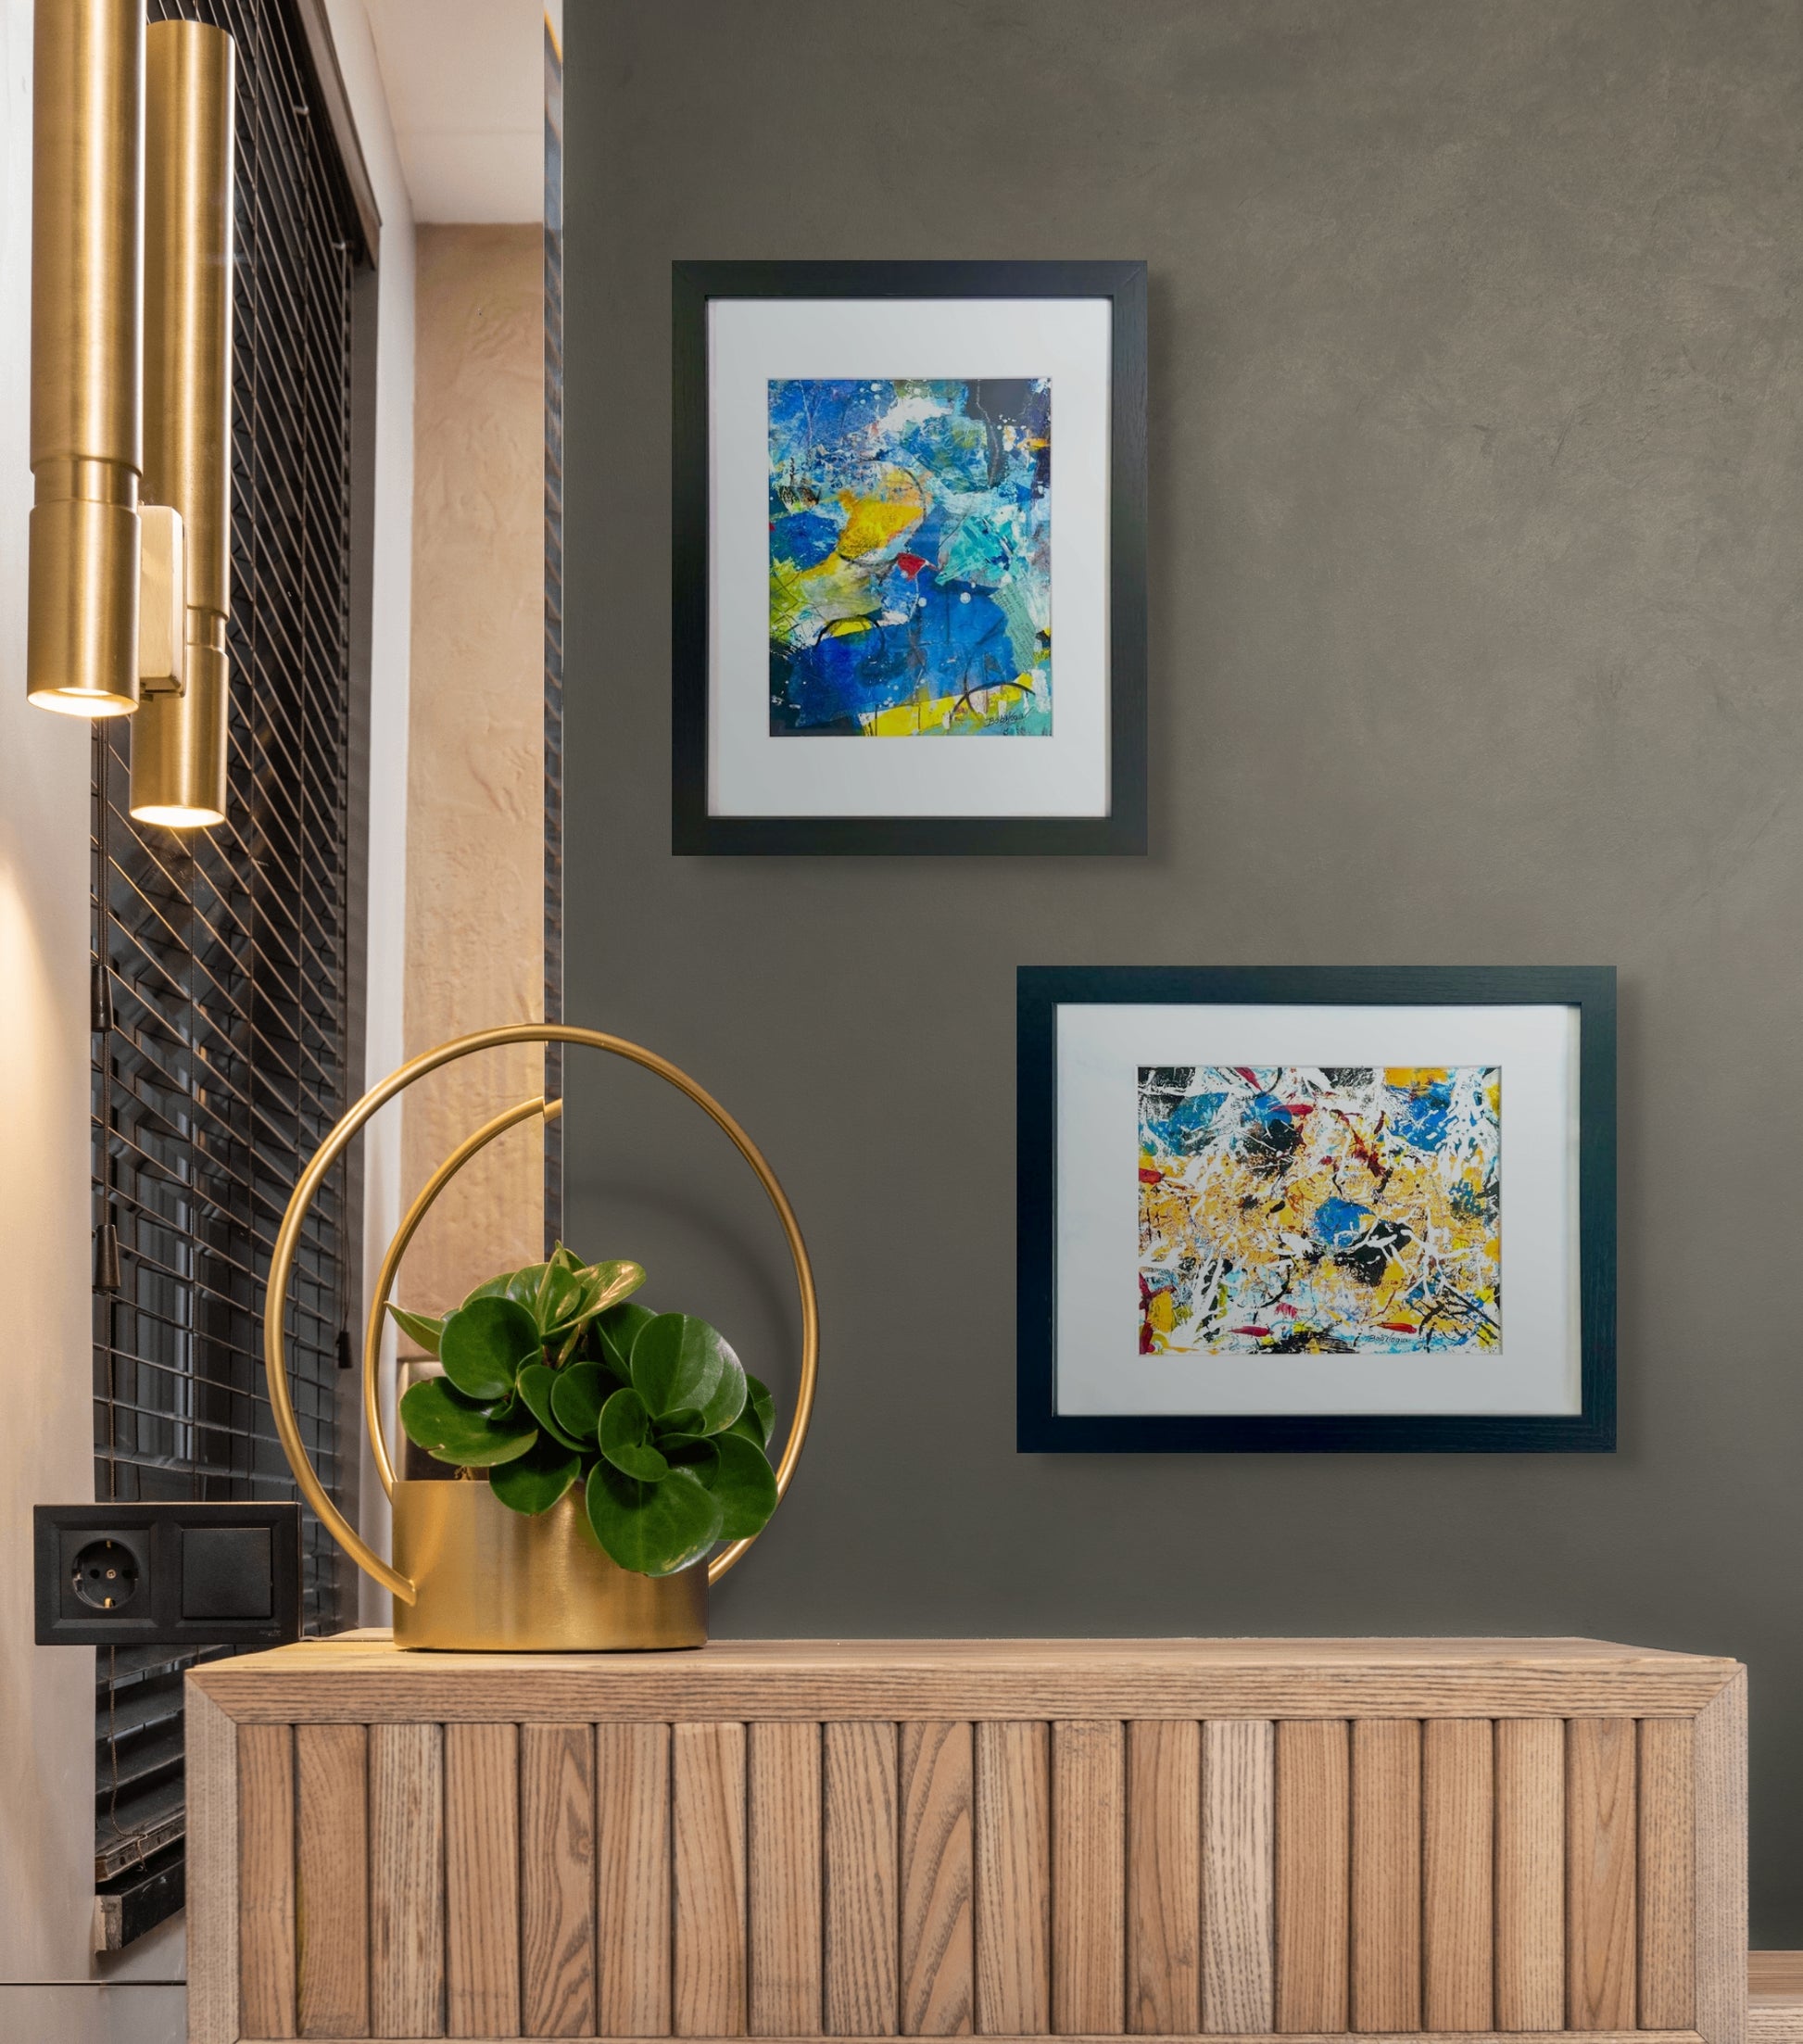 Colorful abstract painting using acrylic; predominant blue, yellow, and white; artist Bob Hogue; 8"x10" and w/black wood frame and white mat 11"x 14"; shown in situ w/a second abstract painting by the artist